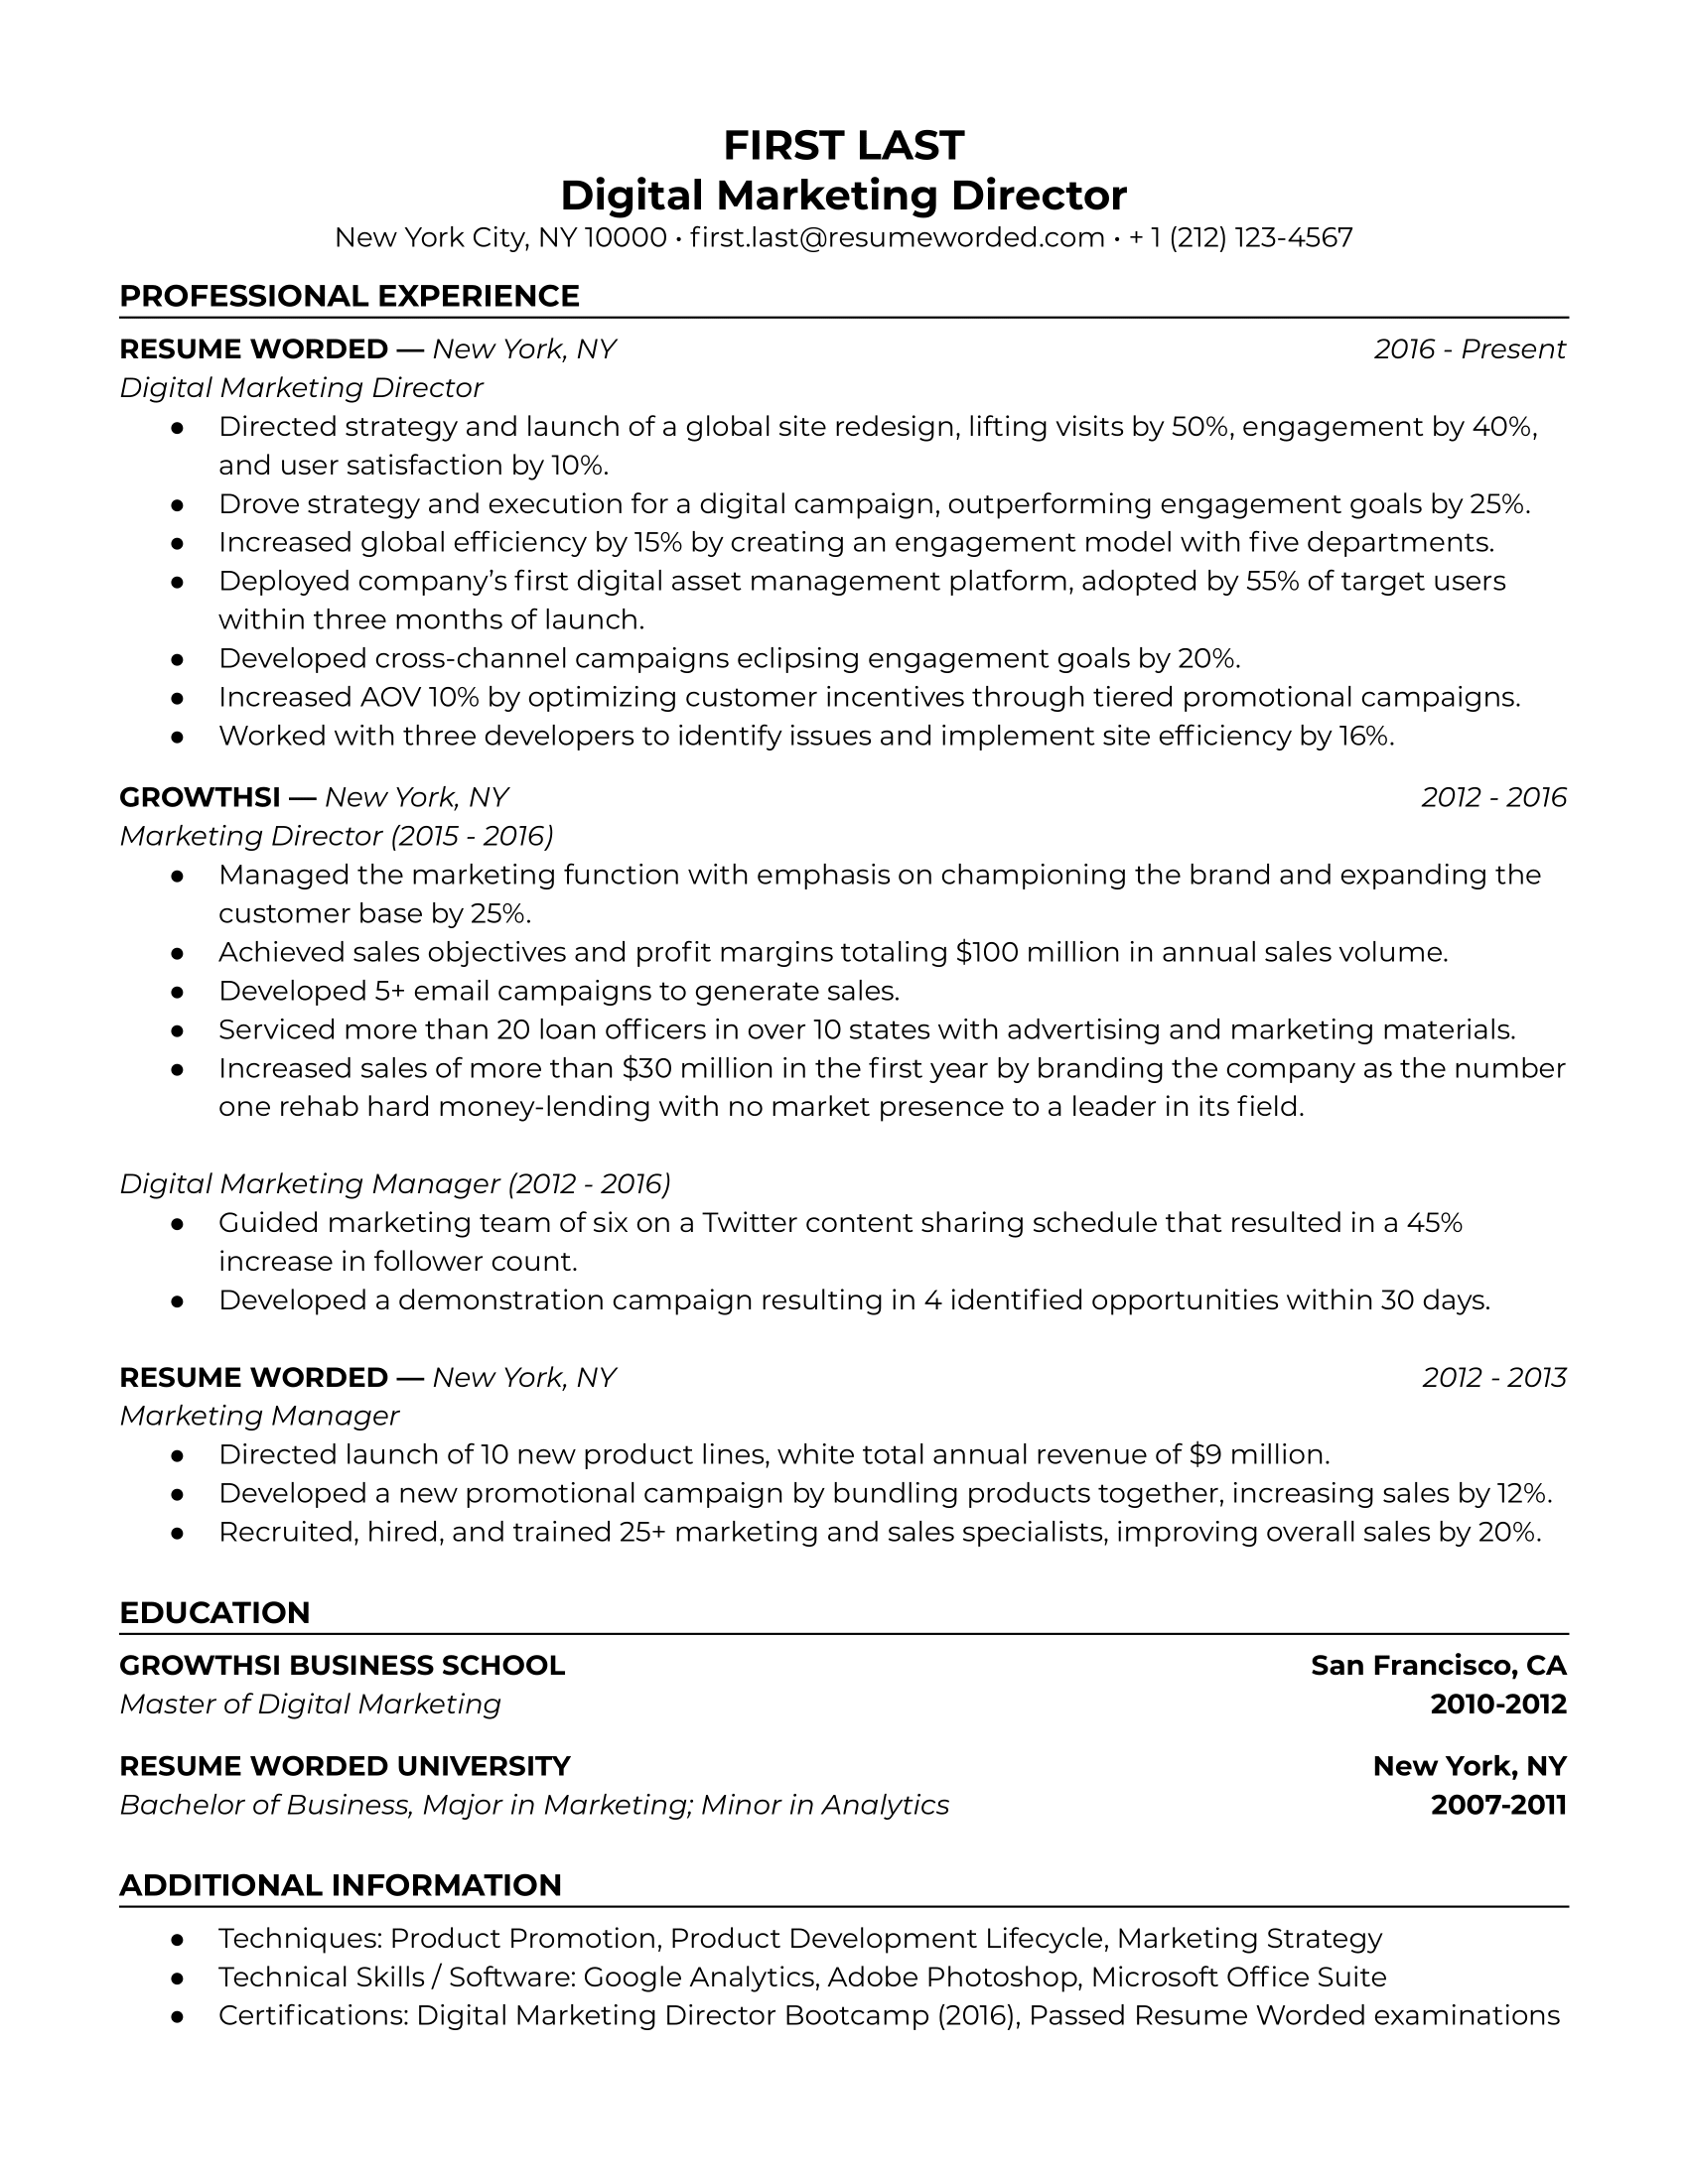 A digital marketing director resume that showcases strong experience in management, shows promotions,relevant education, hard skills, and certifications. 